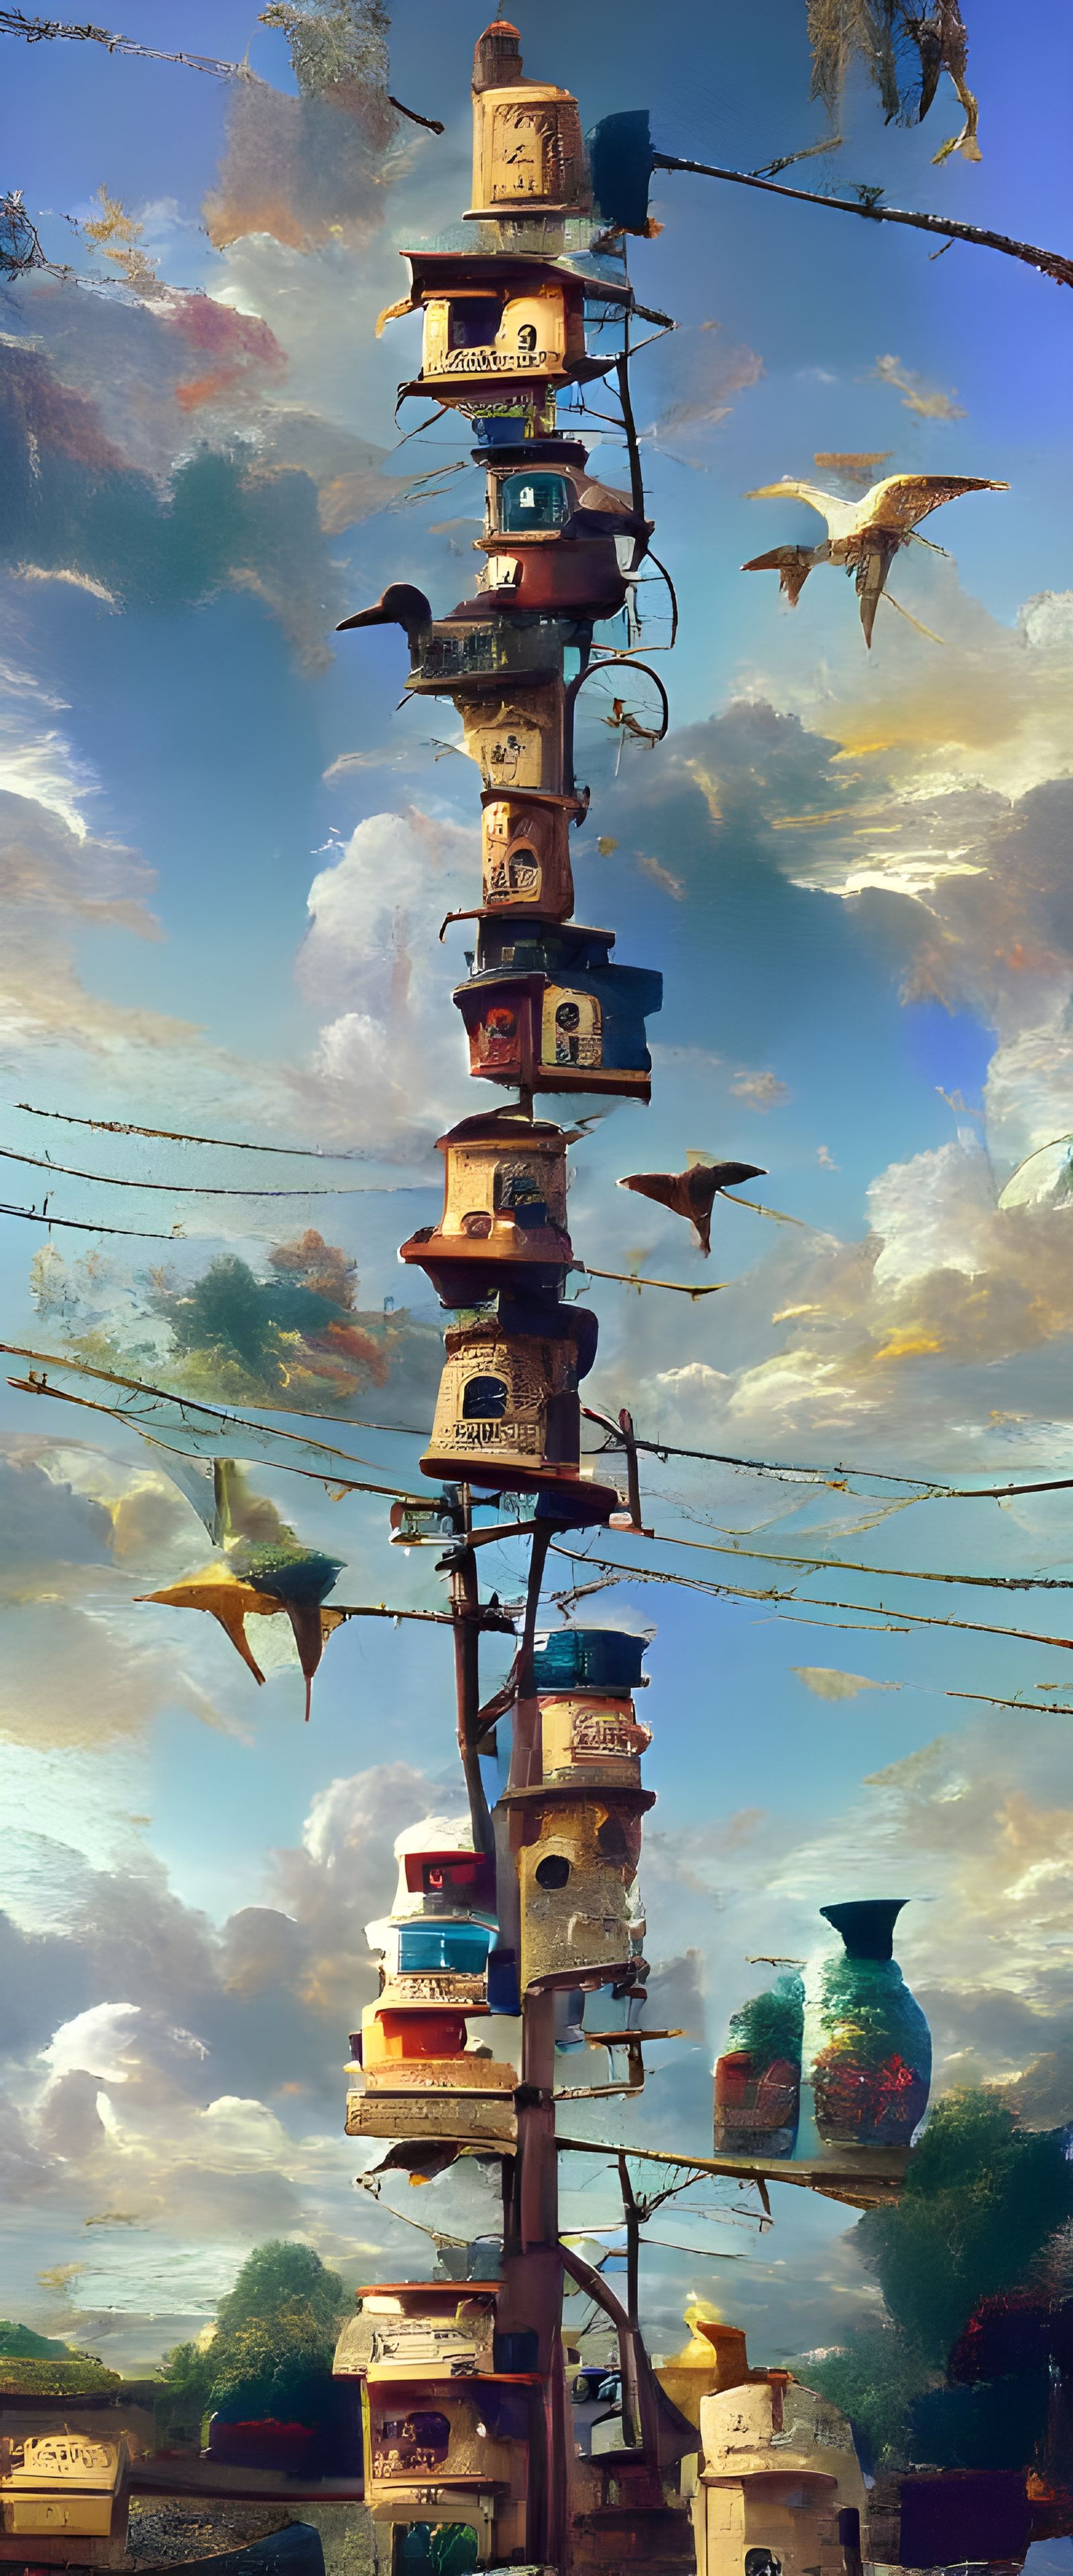 A tower of bird houses